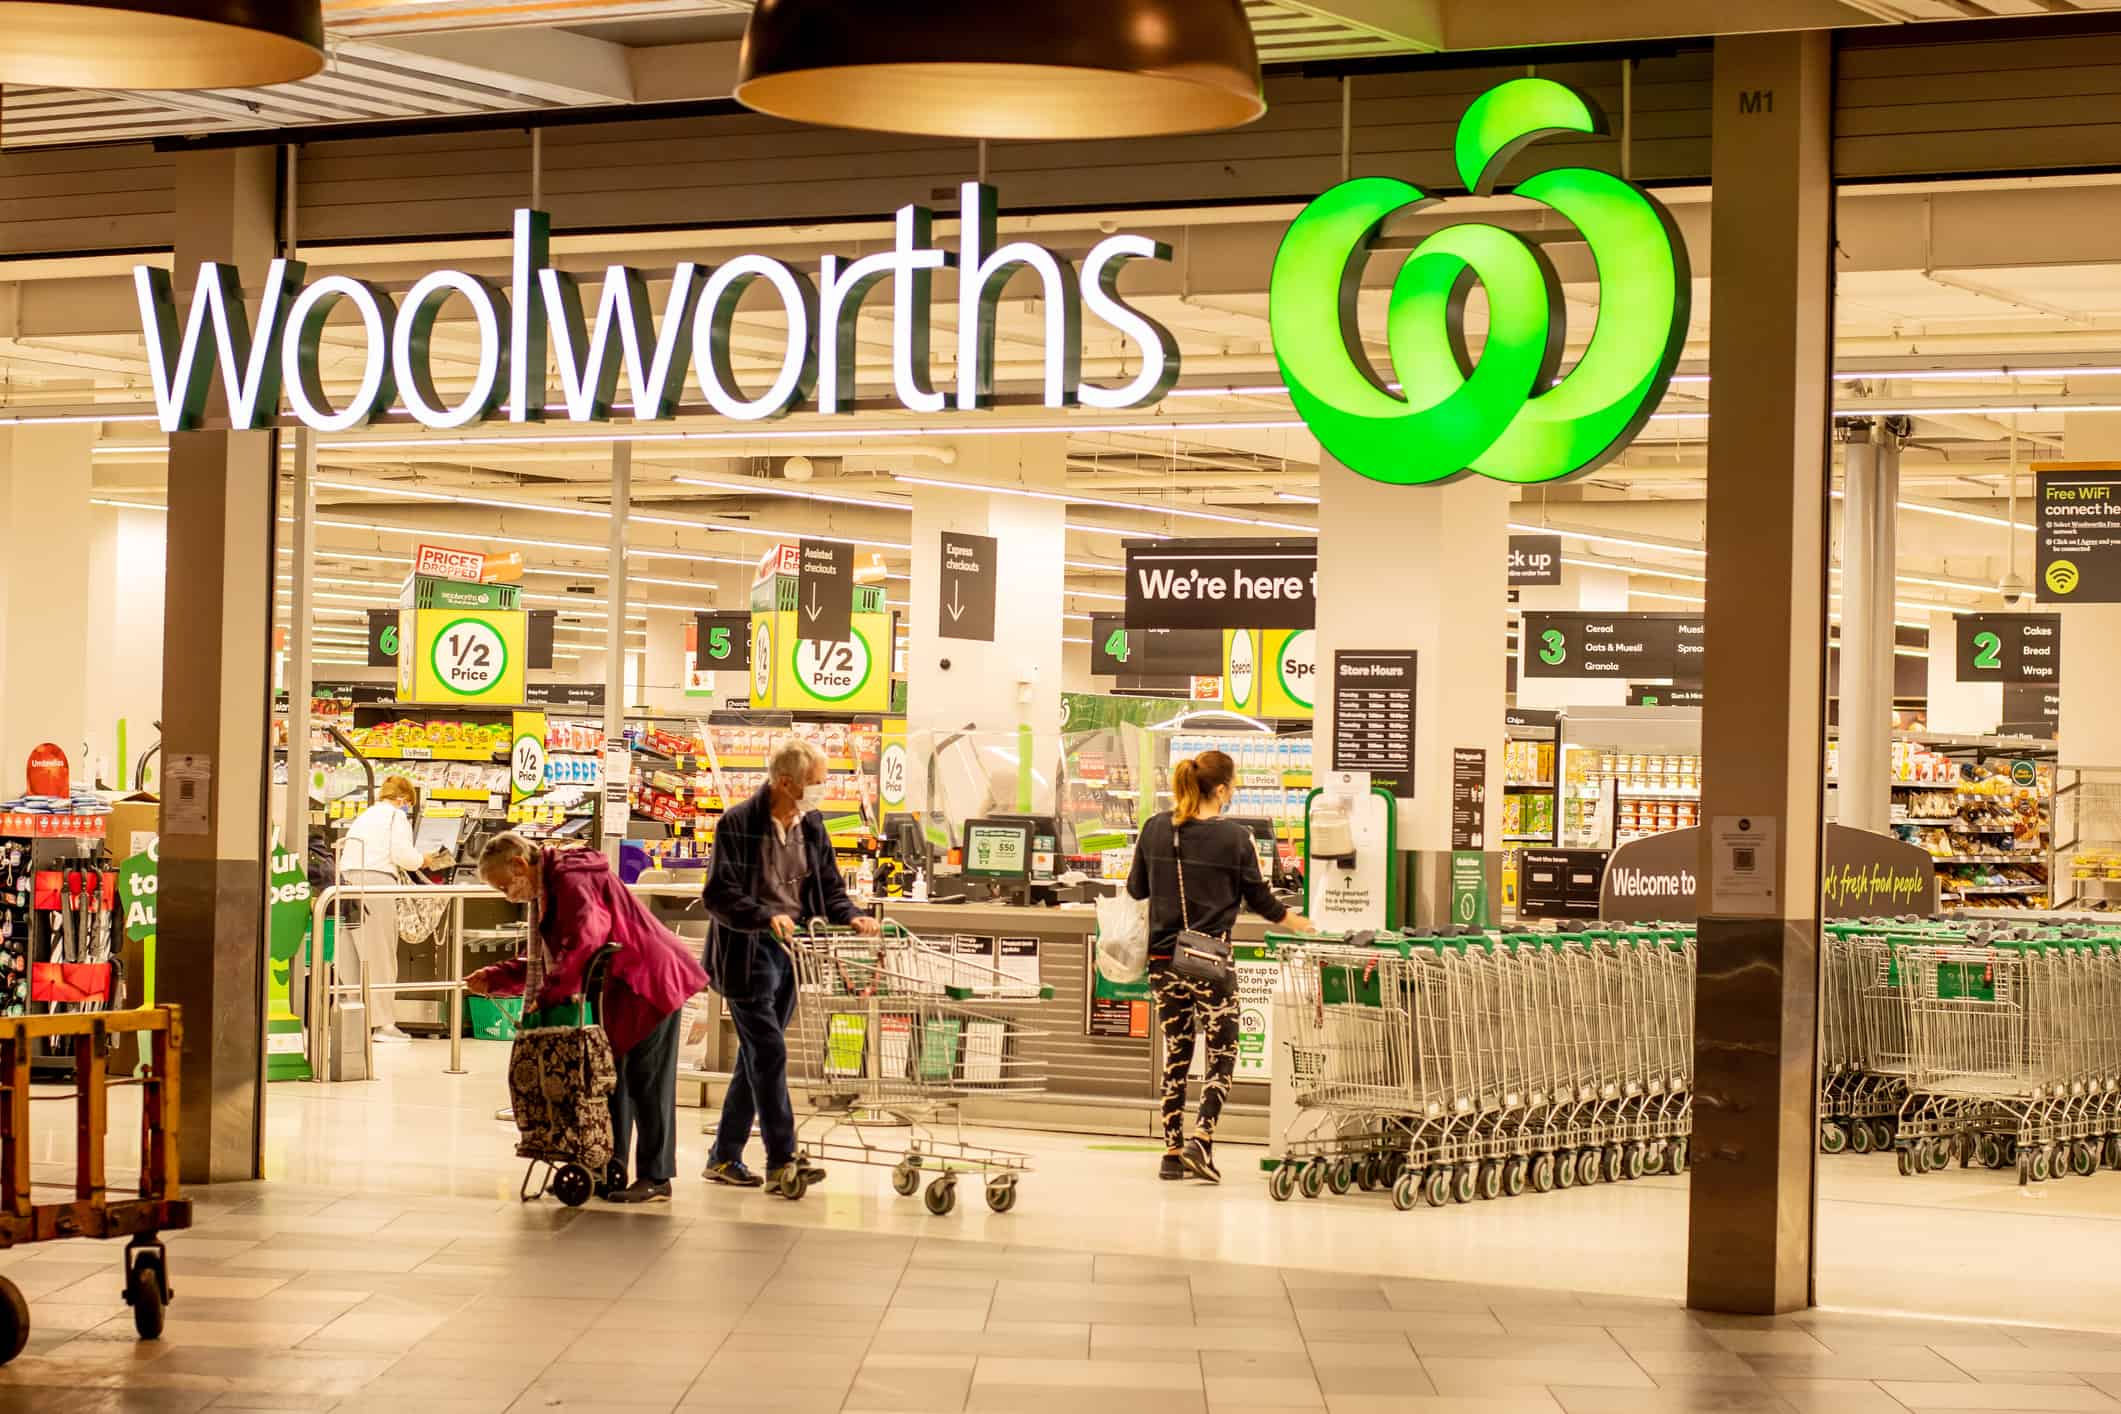 Exterior view of Woolworths